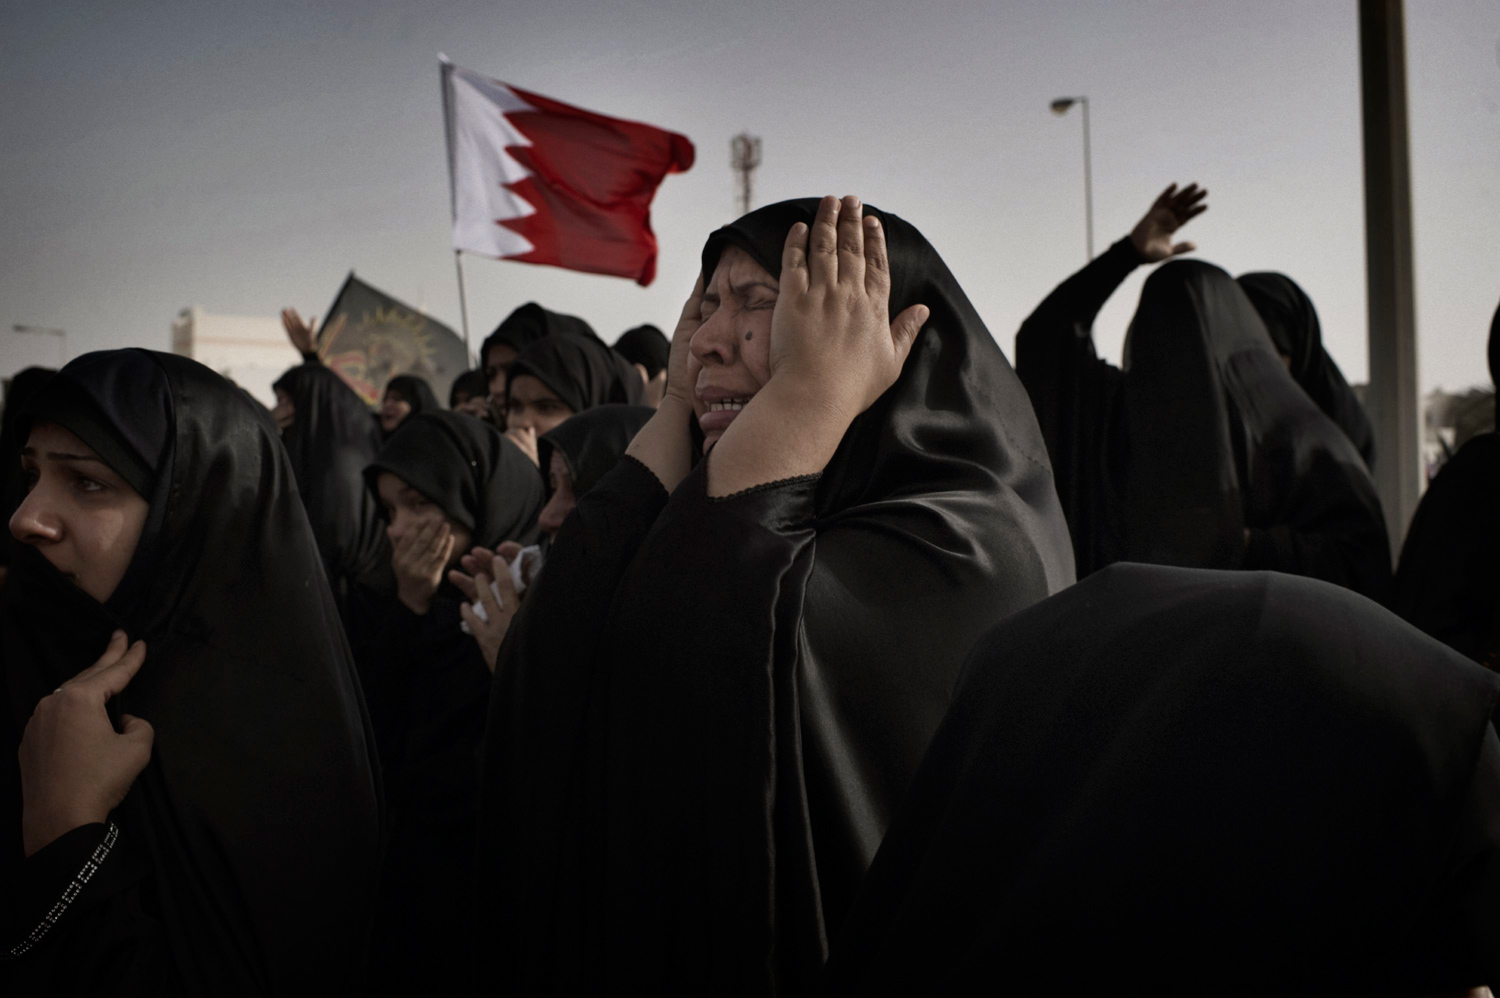 Malkiya, Bahrain — February 22, 2011
                              A woman takes part in the funeral procession for anti-government protester Abdul Ridha Mohammed, who had been shot in the head when Bahraini security forces attacked anti-government demonstrators in Pearl Roundabout the previous week.